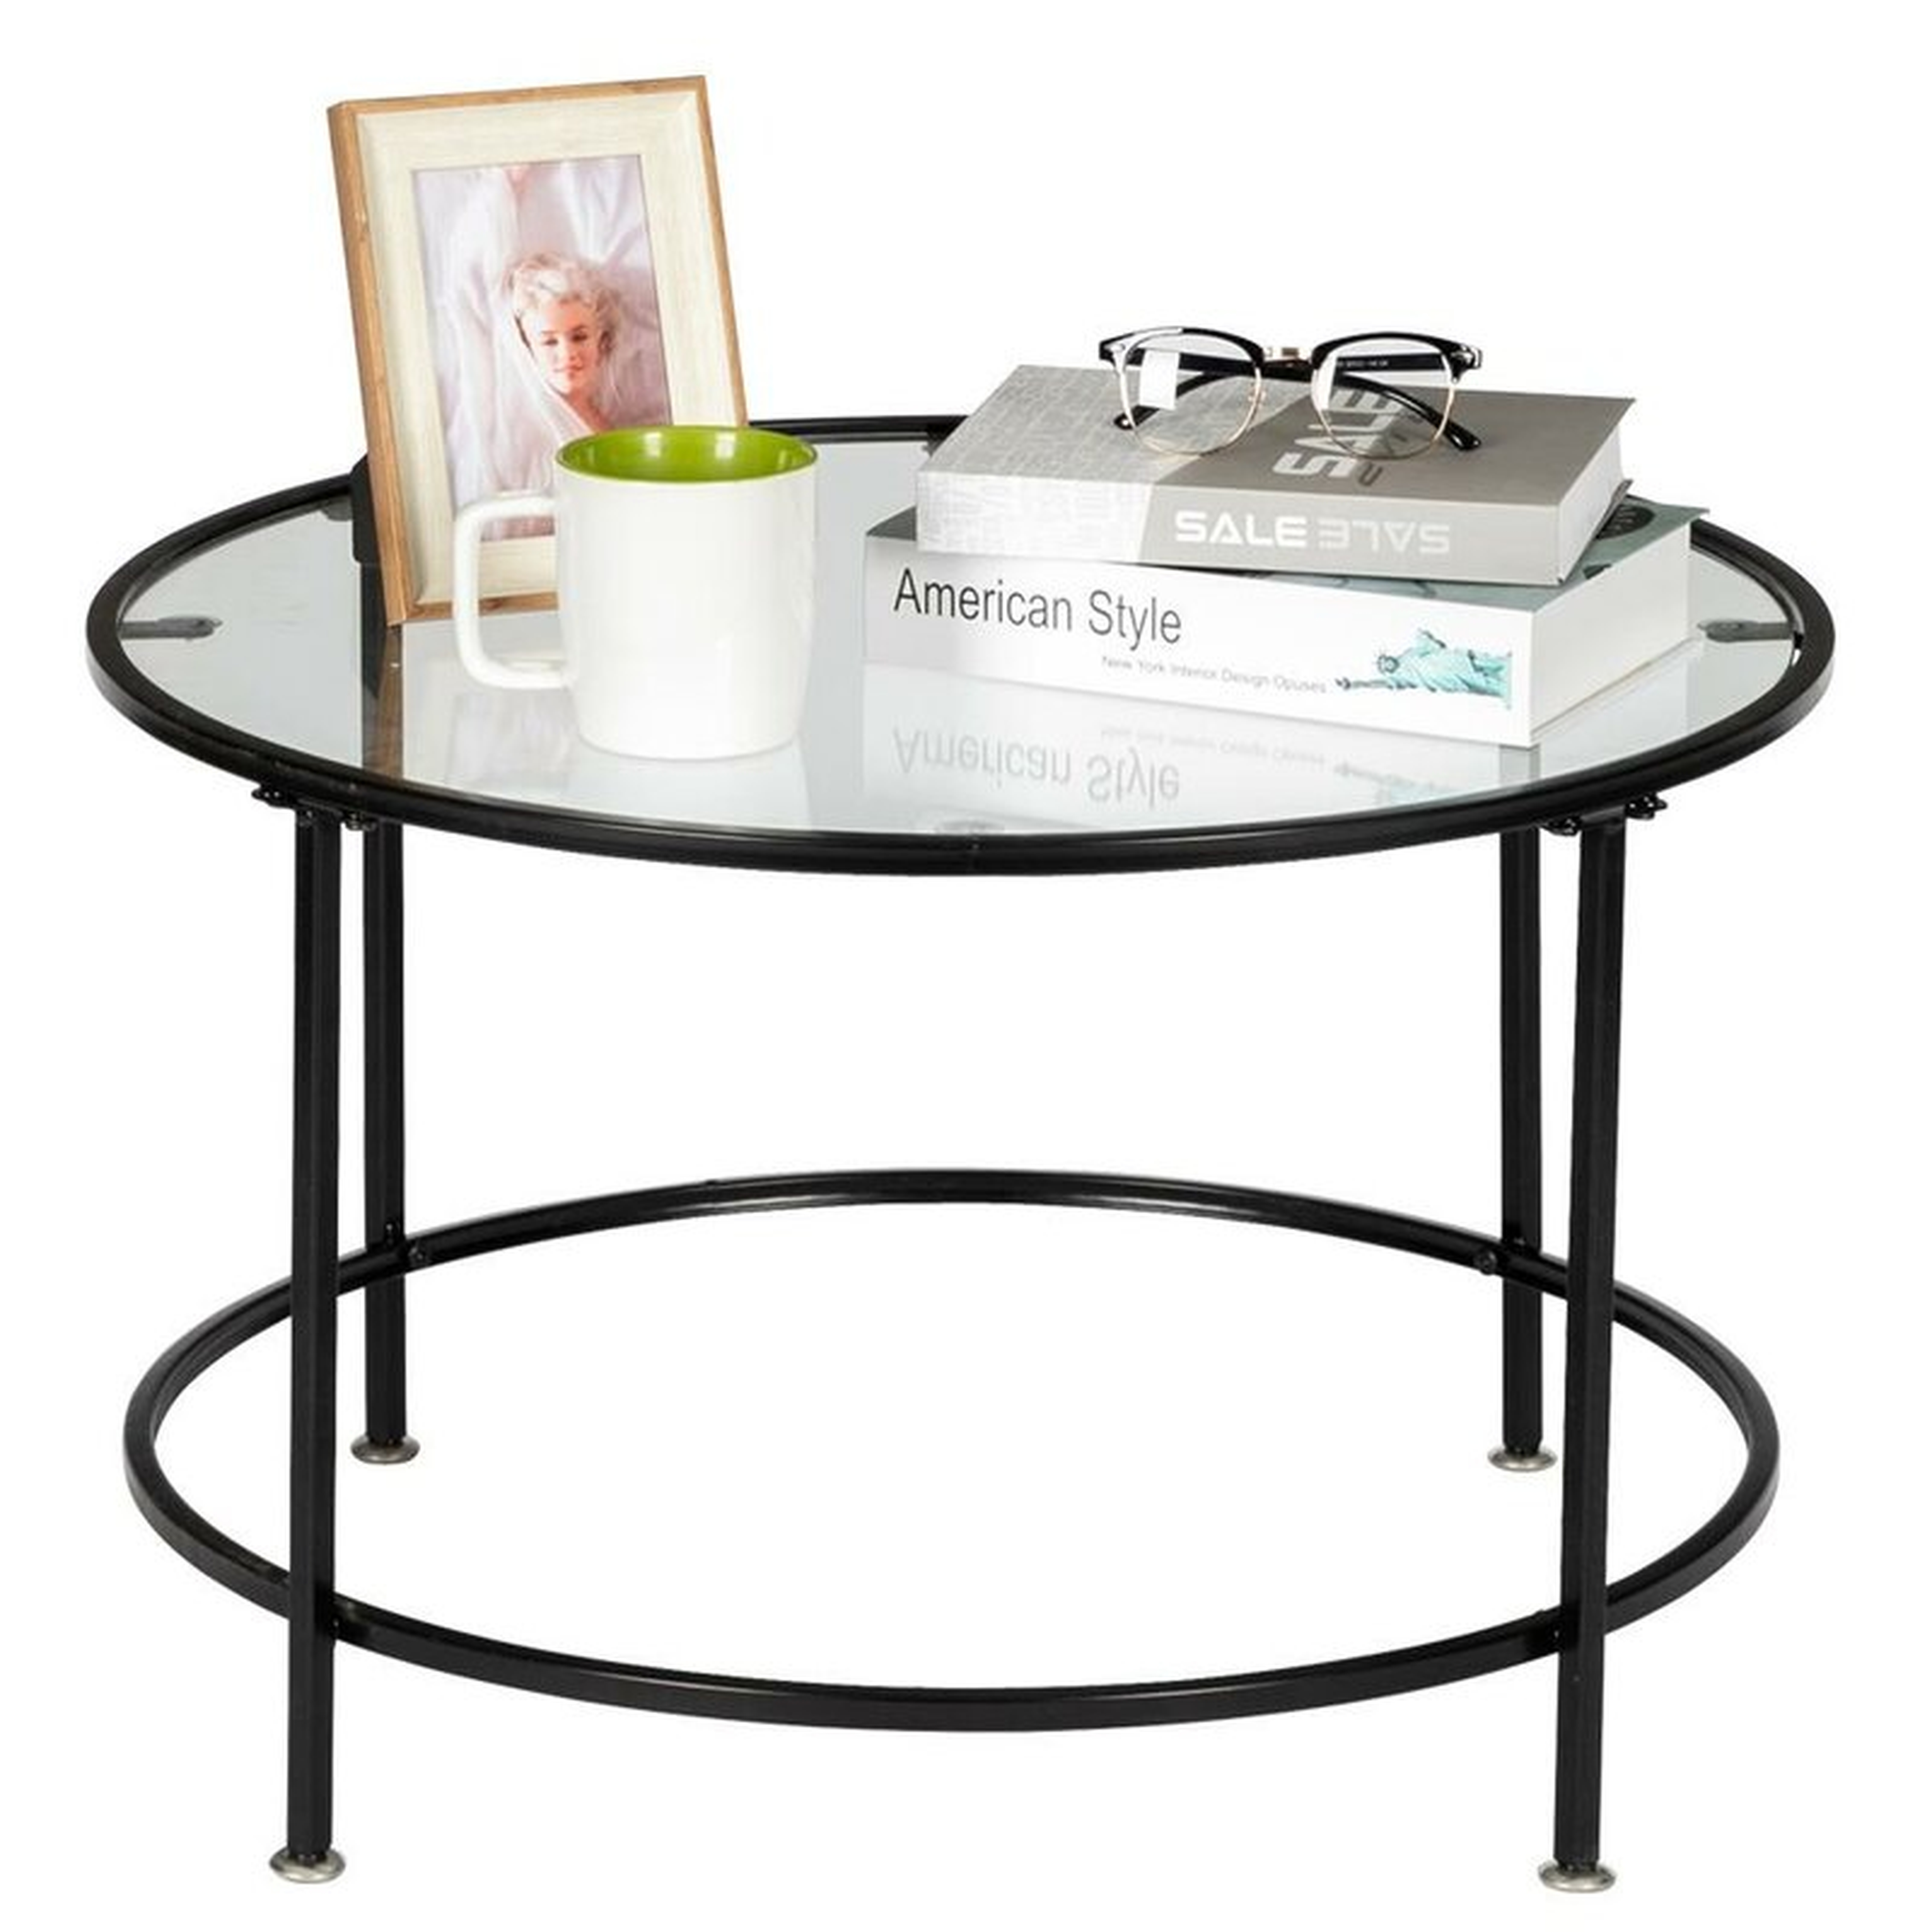 26" Round Tempered Glass Black Frame Coffee Table - Wayfair